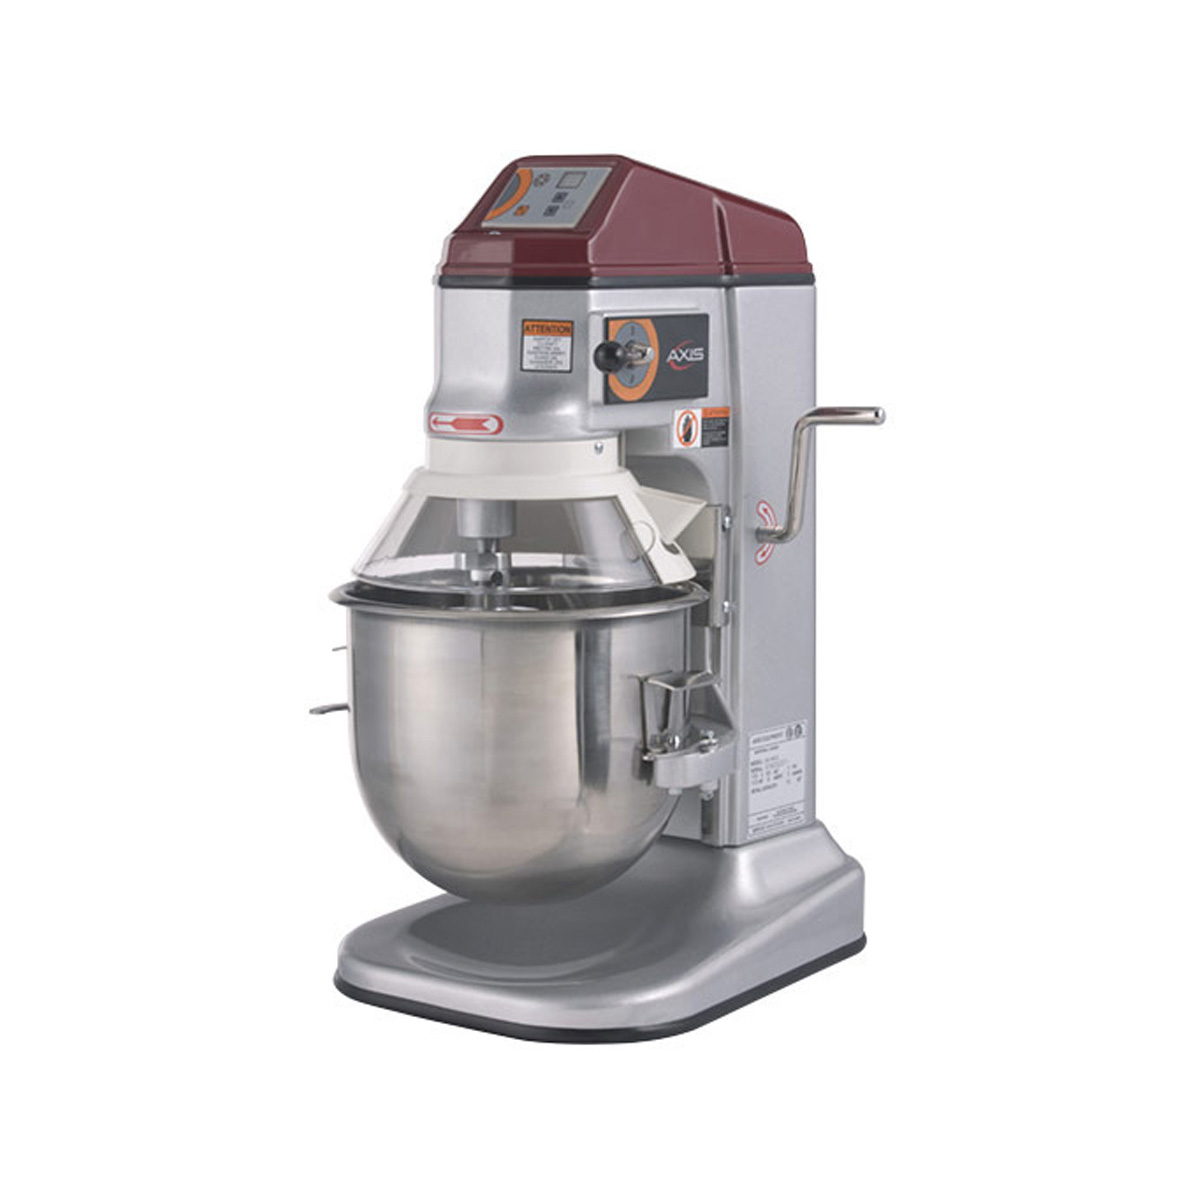 Axis AX-M12 Countertop Commercial Planetary Mixer, 12 qt. Capacity, 3-Speed